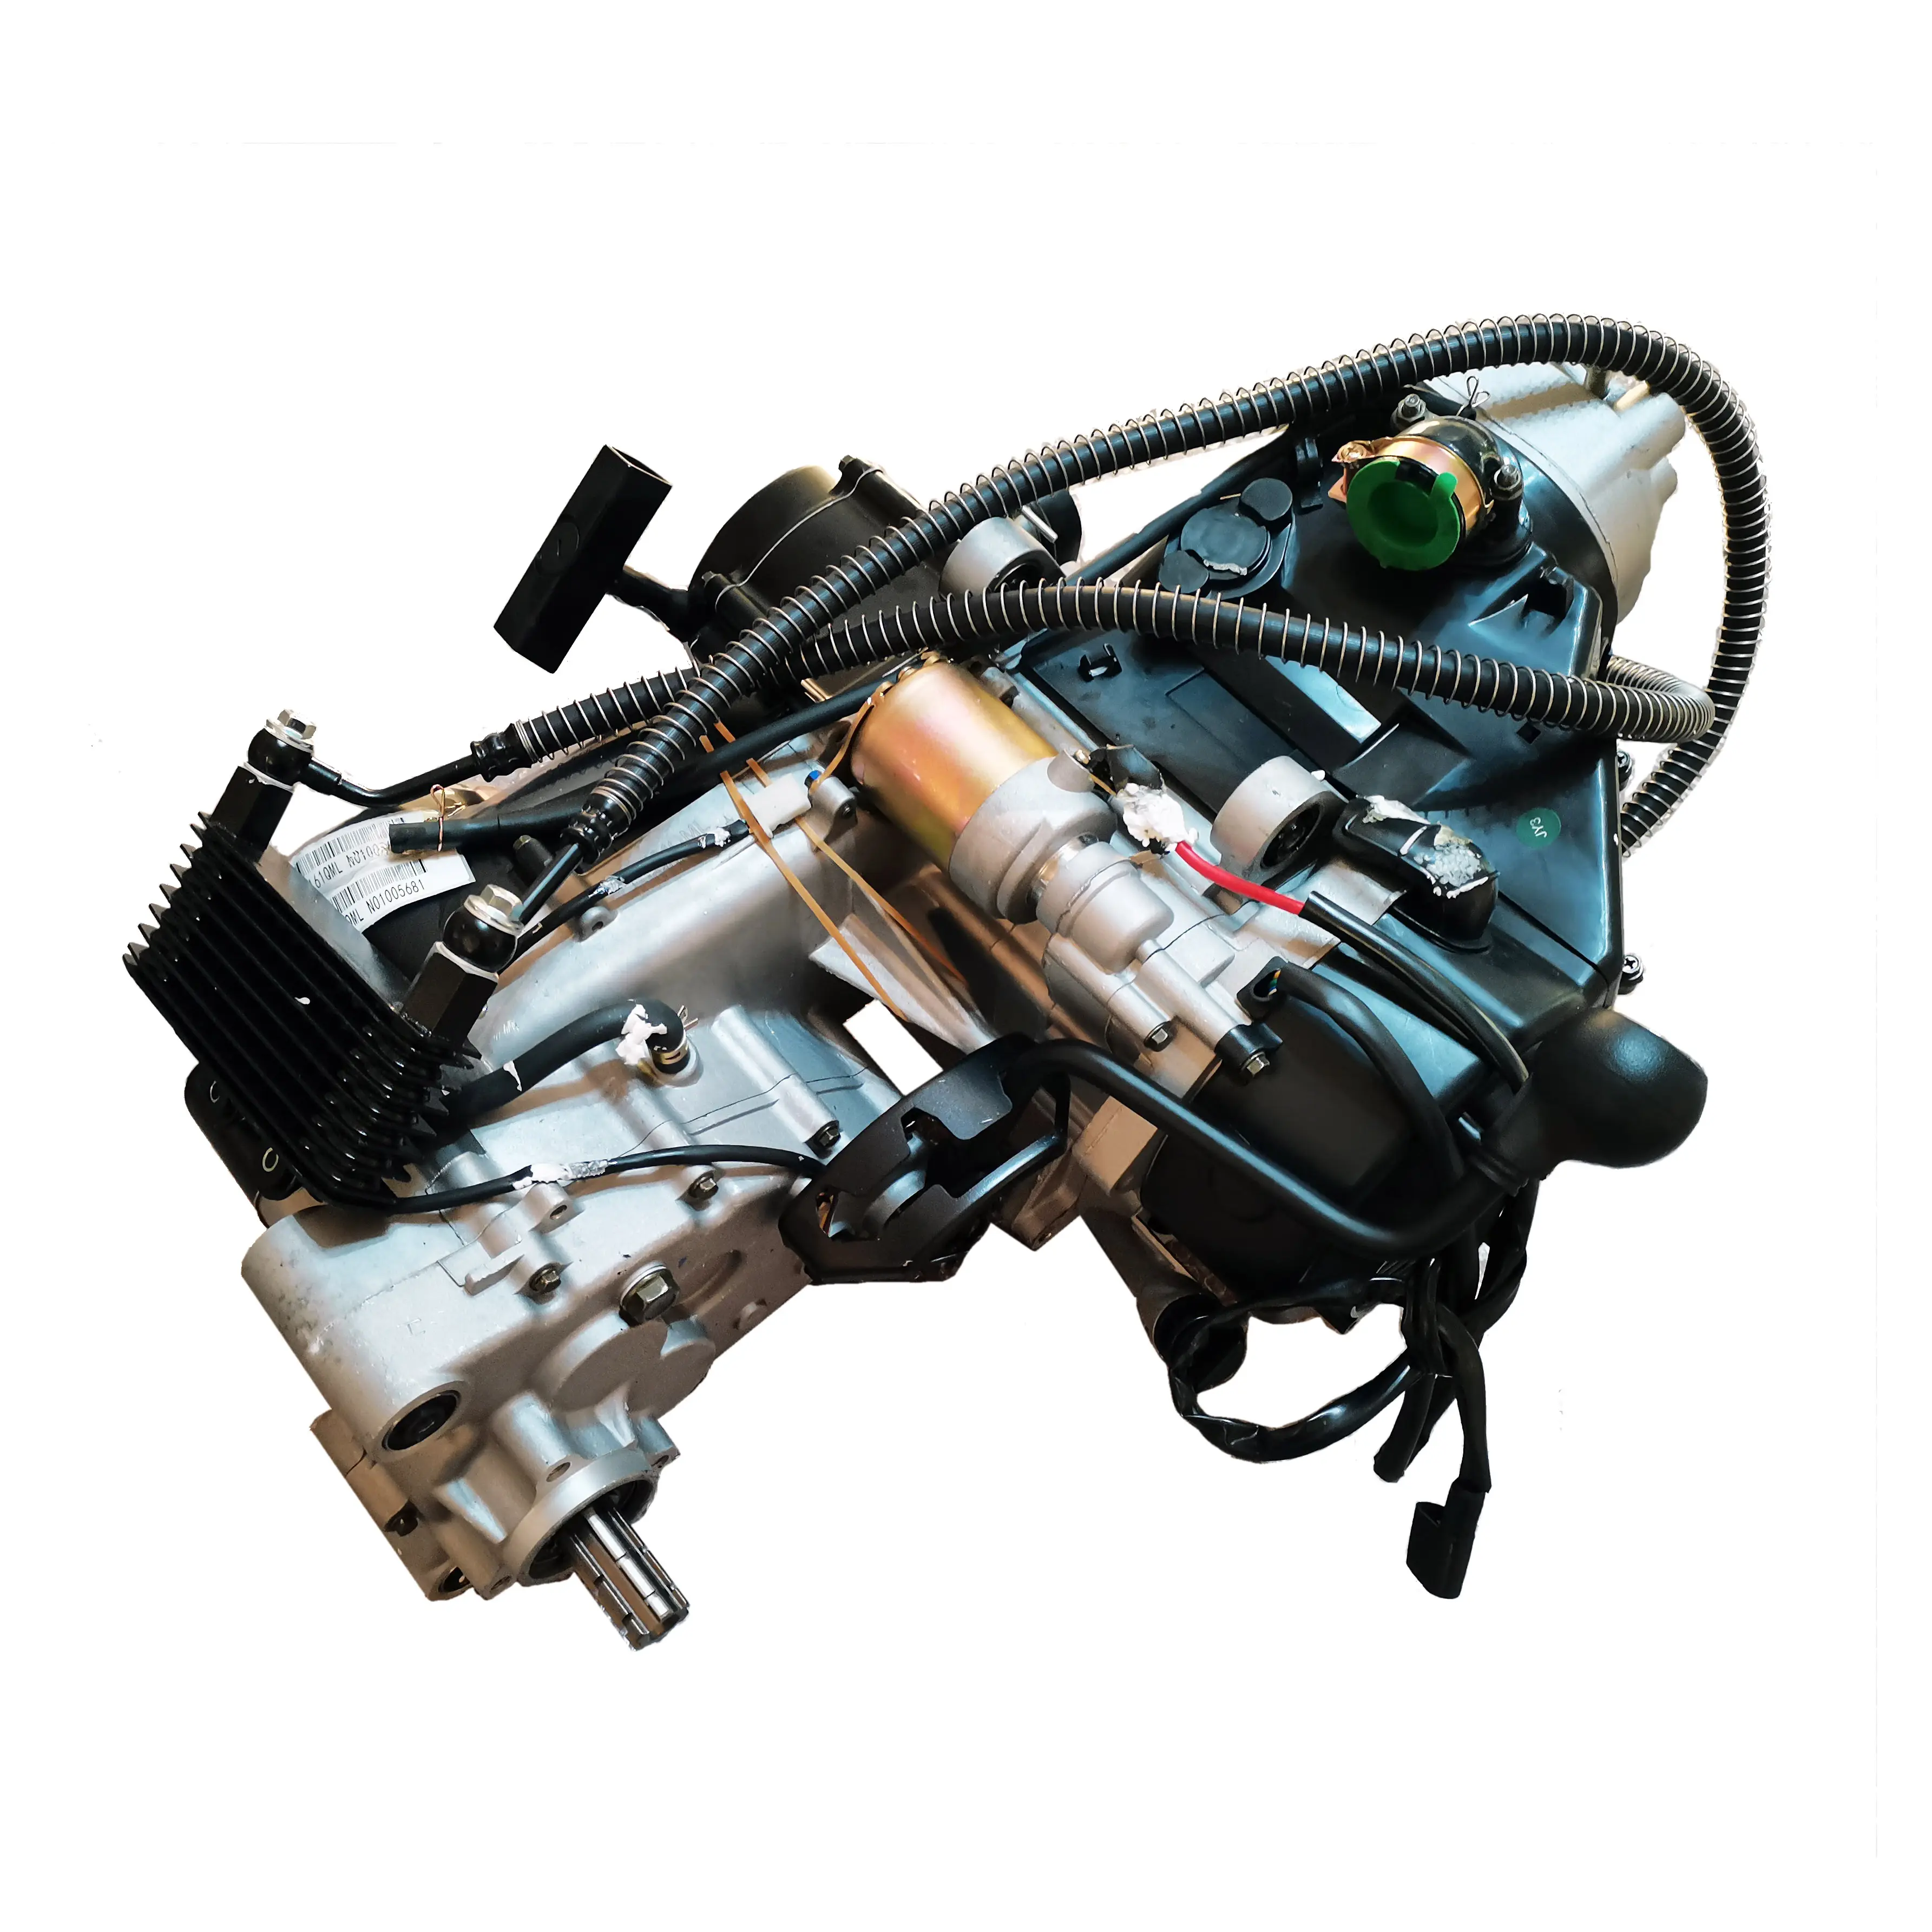 200cc CVT GY6 1+1 Gasoline ATV Engines with Oil Cooled